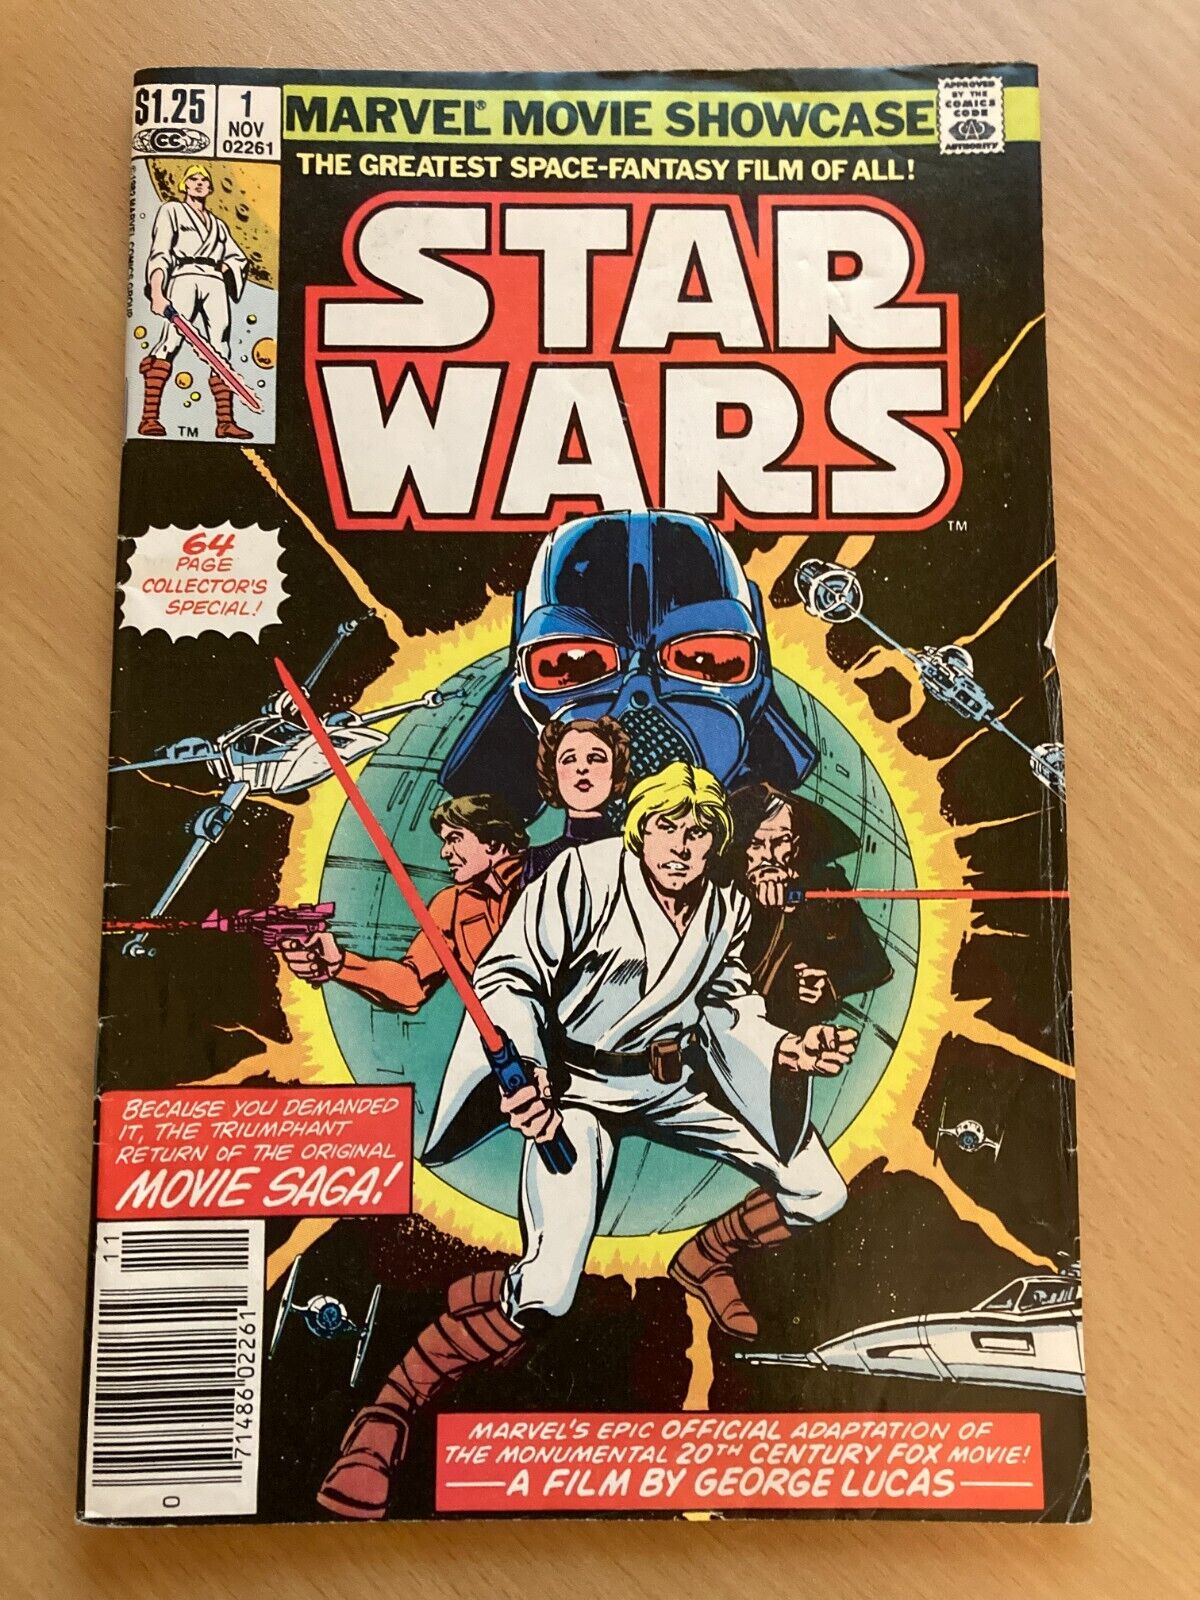 Marvel Movie Showcase Star Wars #1 and 2 Marvel Comics (1982) GD condition